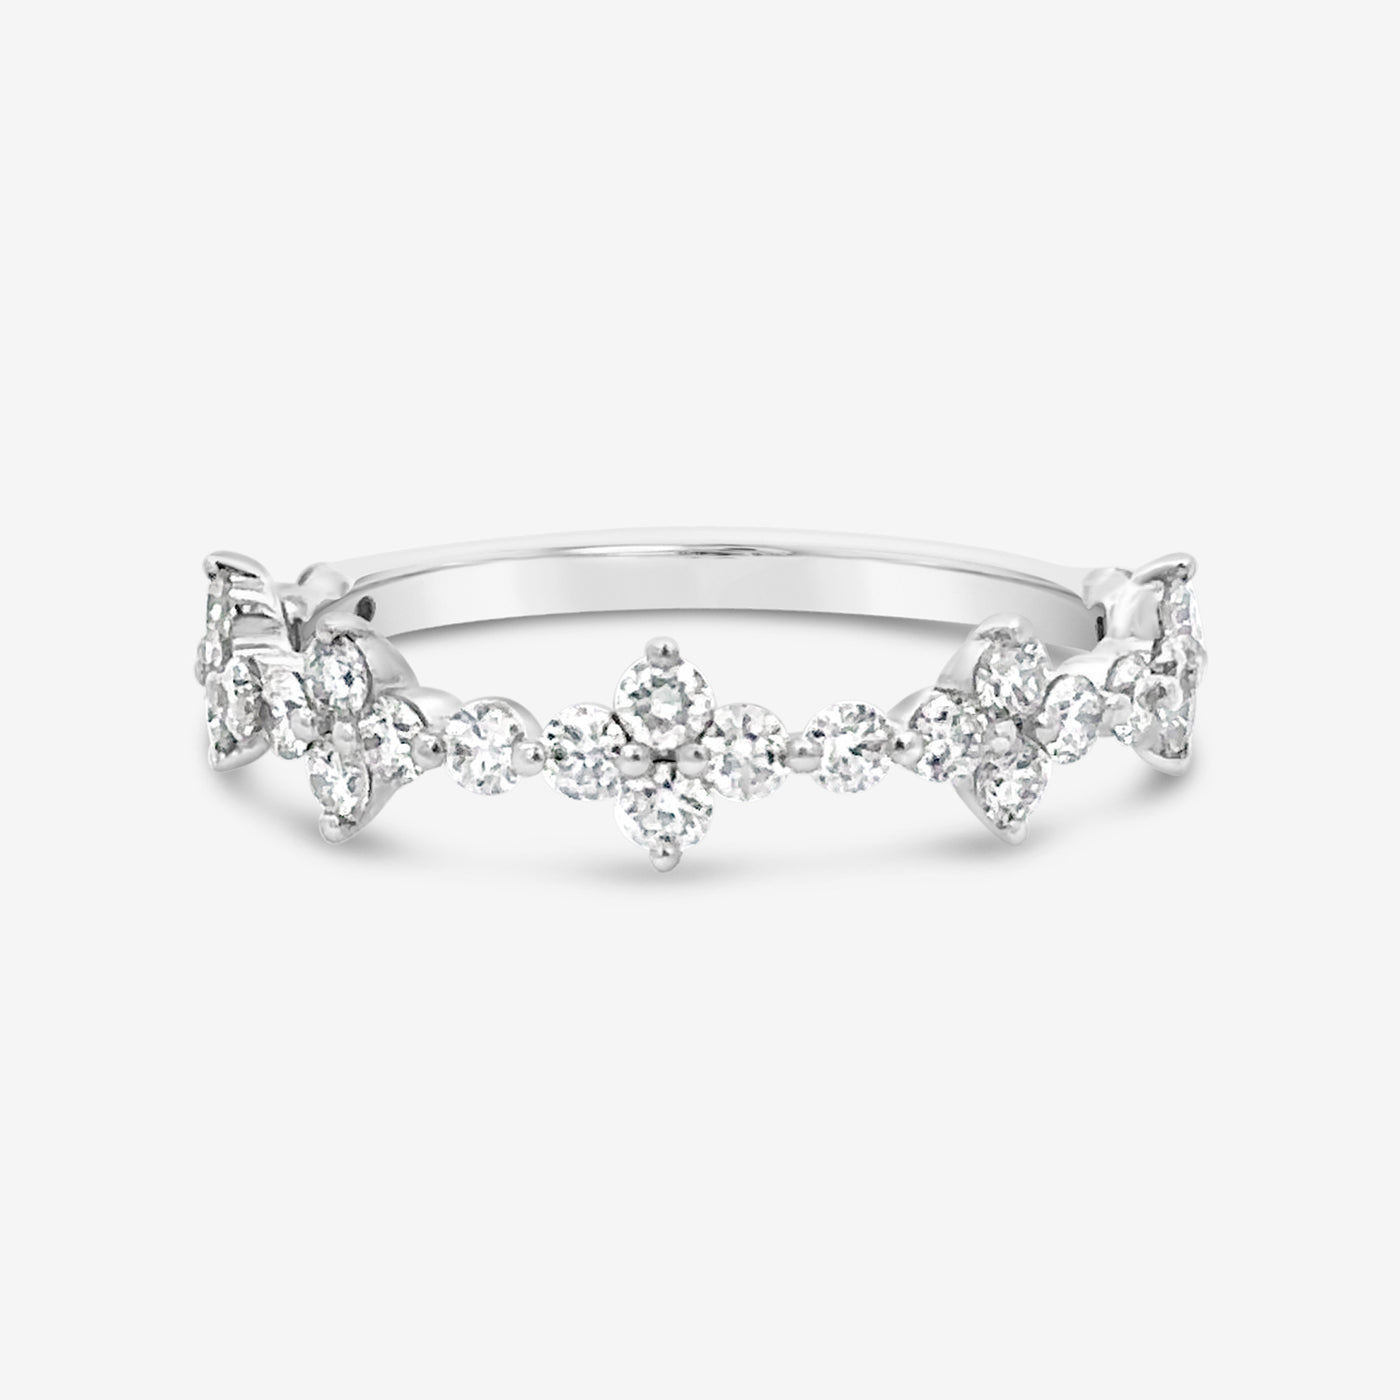 3/4 Diamond Floral Band Ring